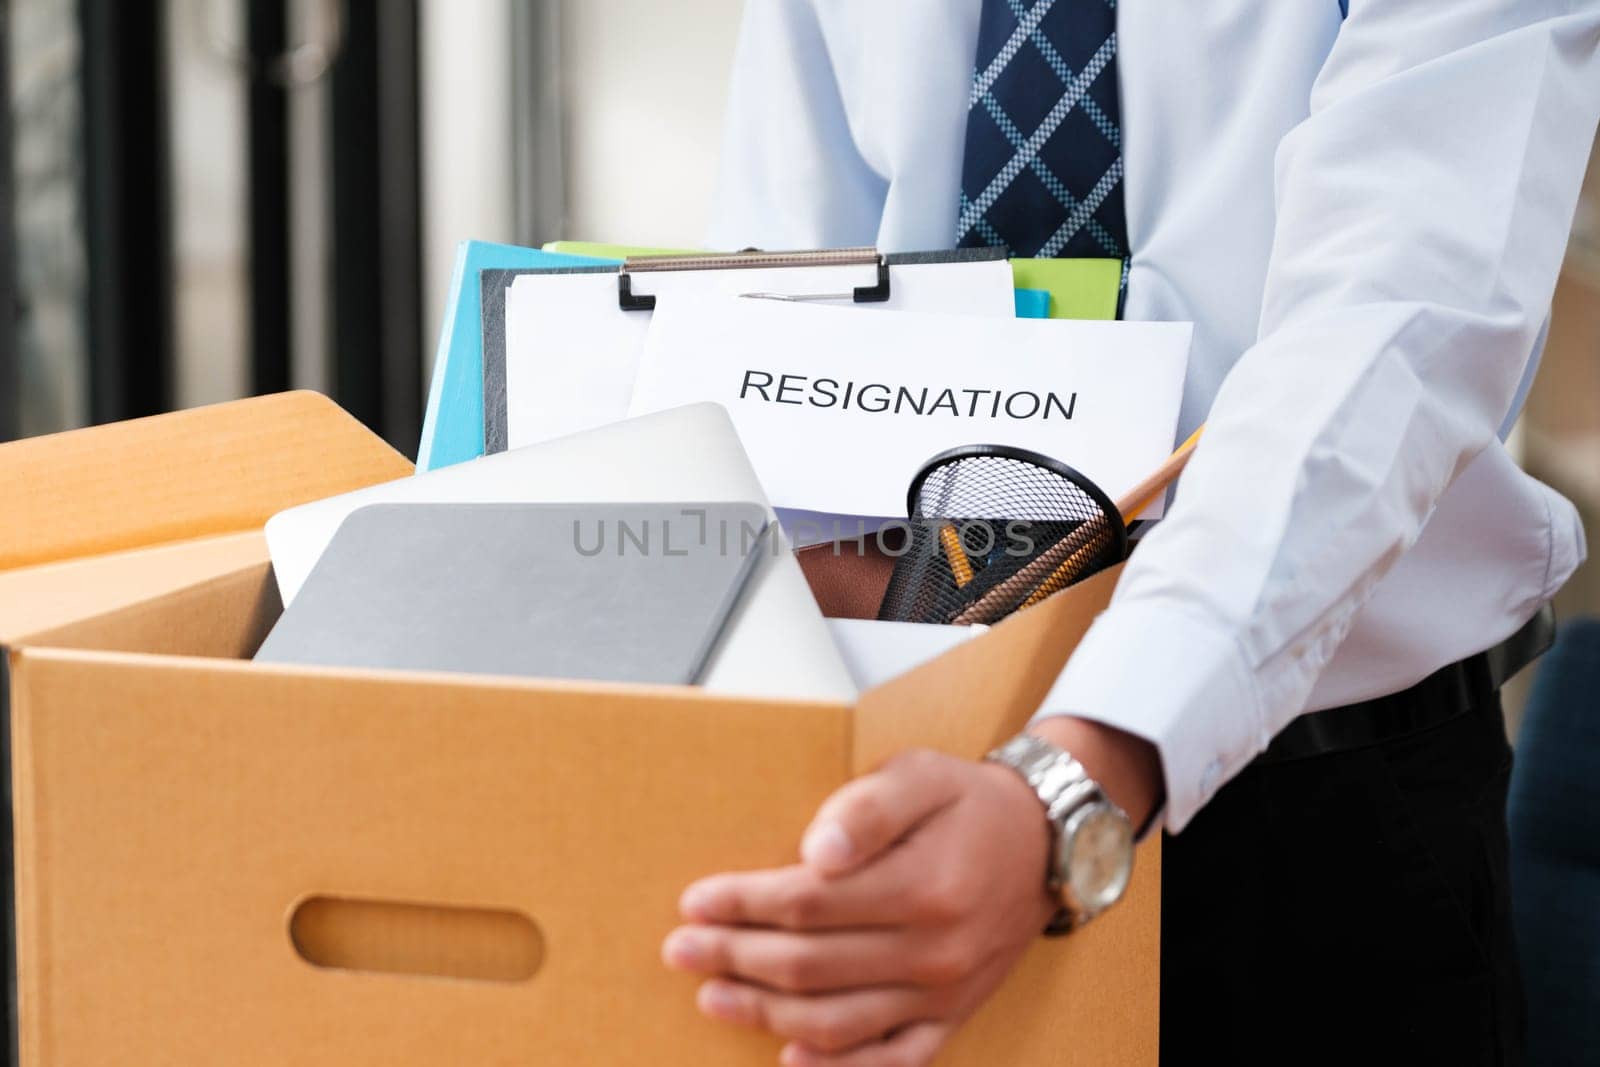 Male Employee Packing His Personal Belongings into a Cardboard Box with a Resignation Letter, Signaling His Decision to Leave the Job